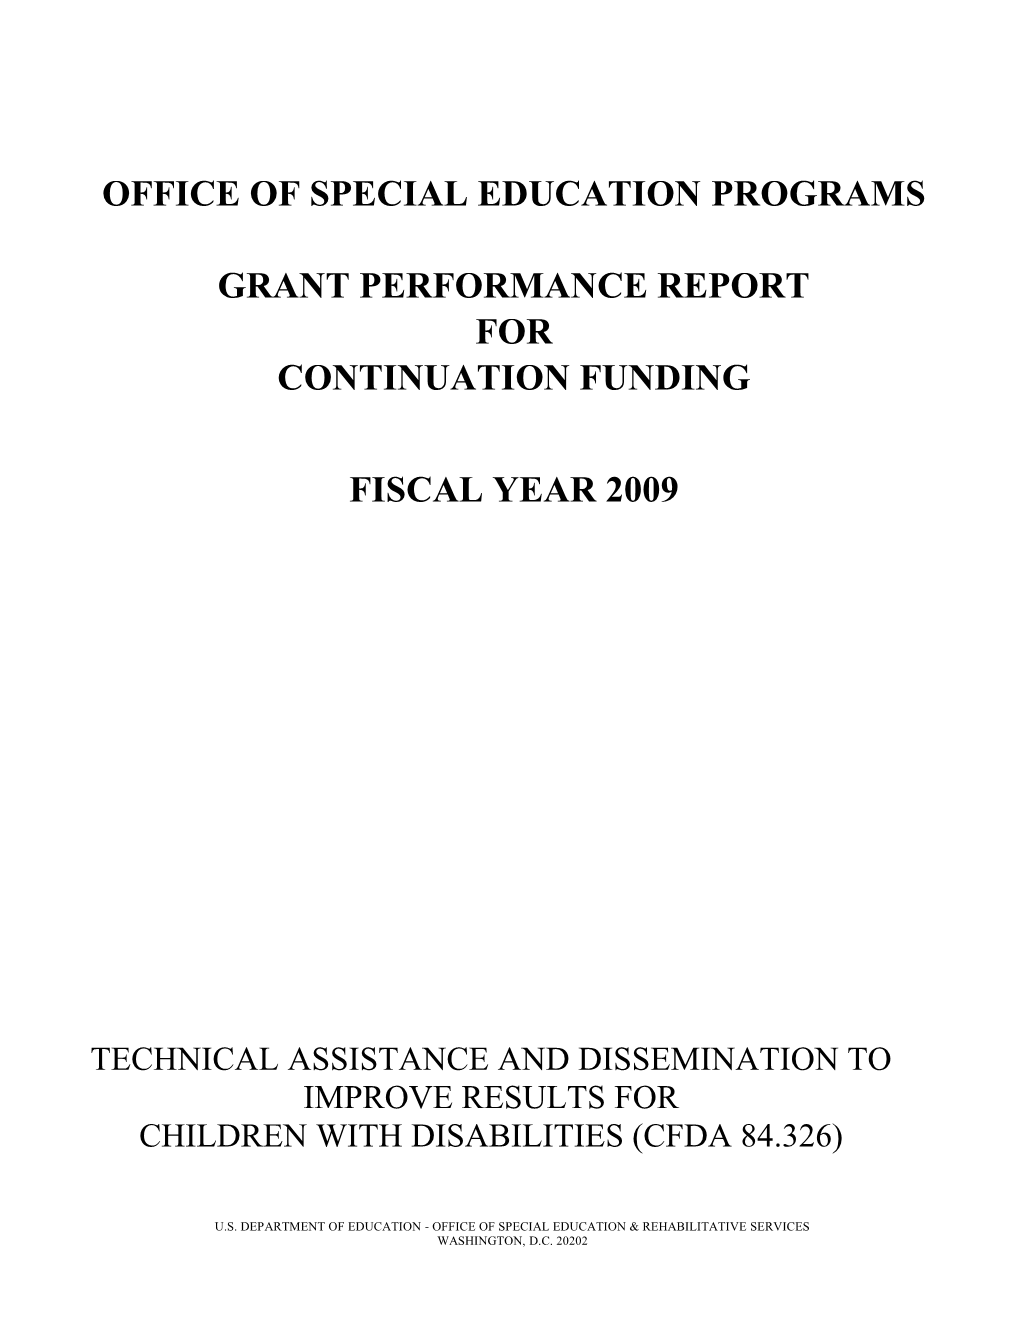 Performance Report for Continuation Funding, FY 2009, CFDA 84.326 (MS Word)